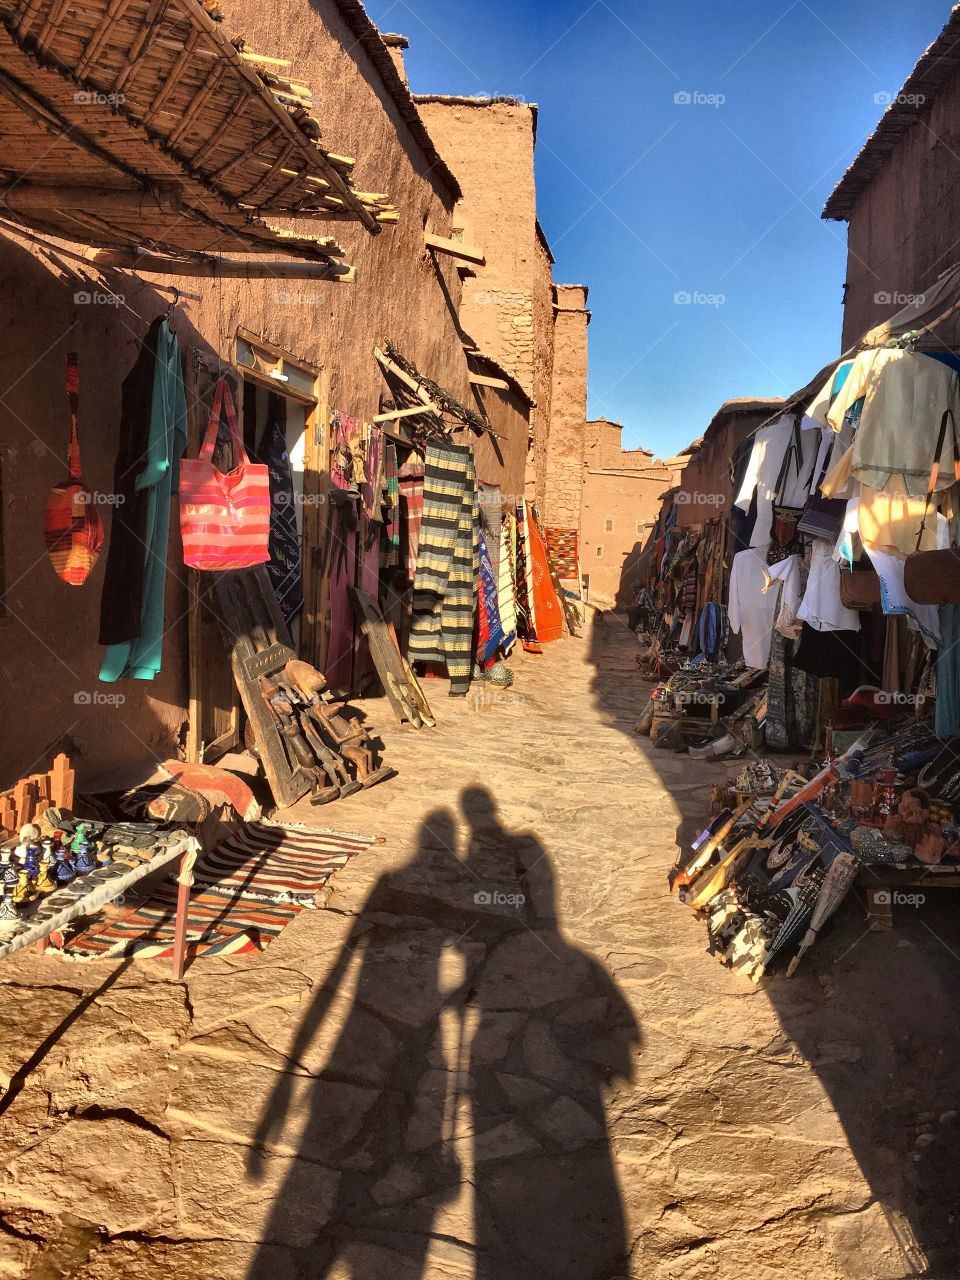 Marocco by me